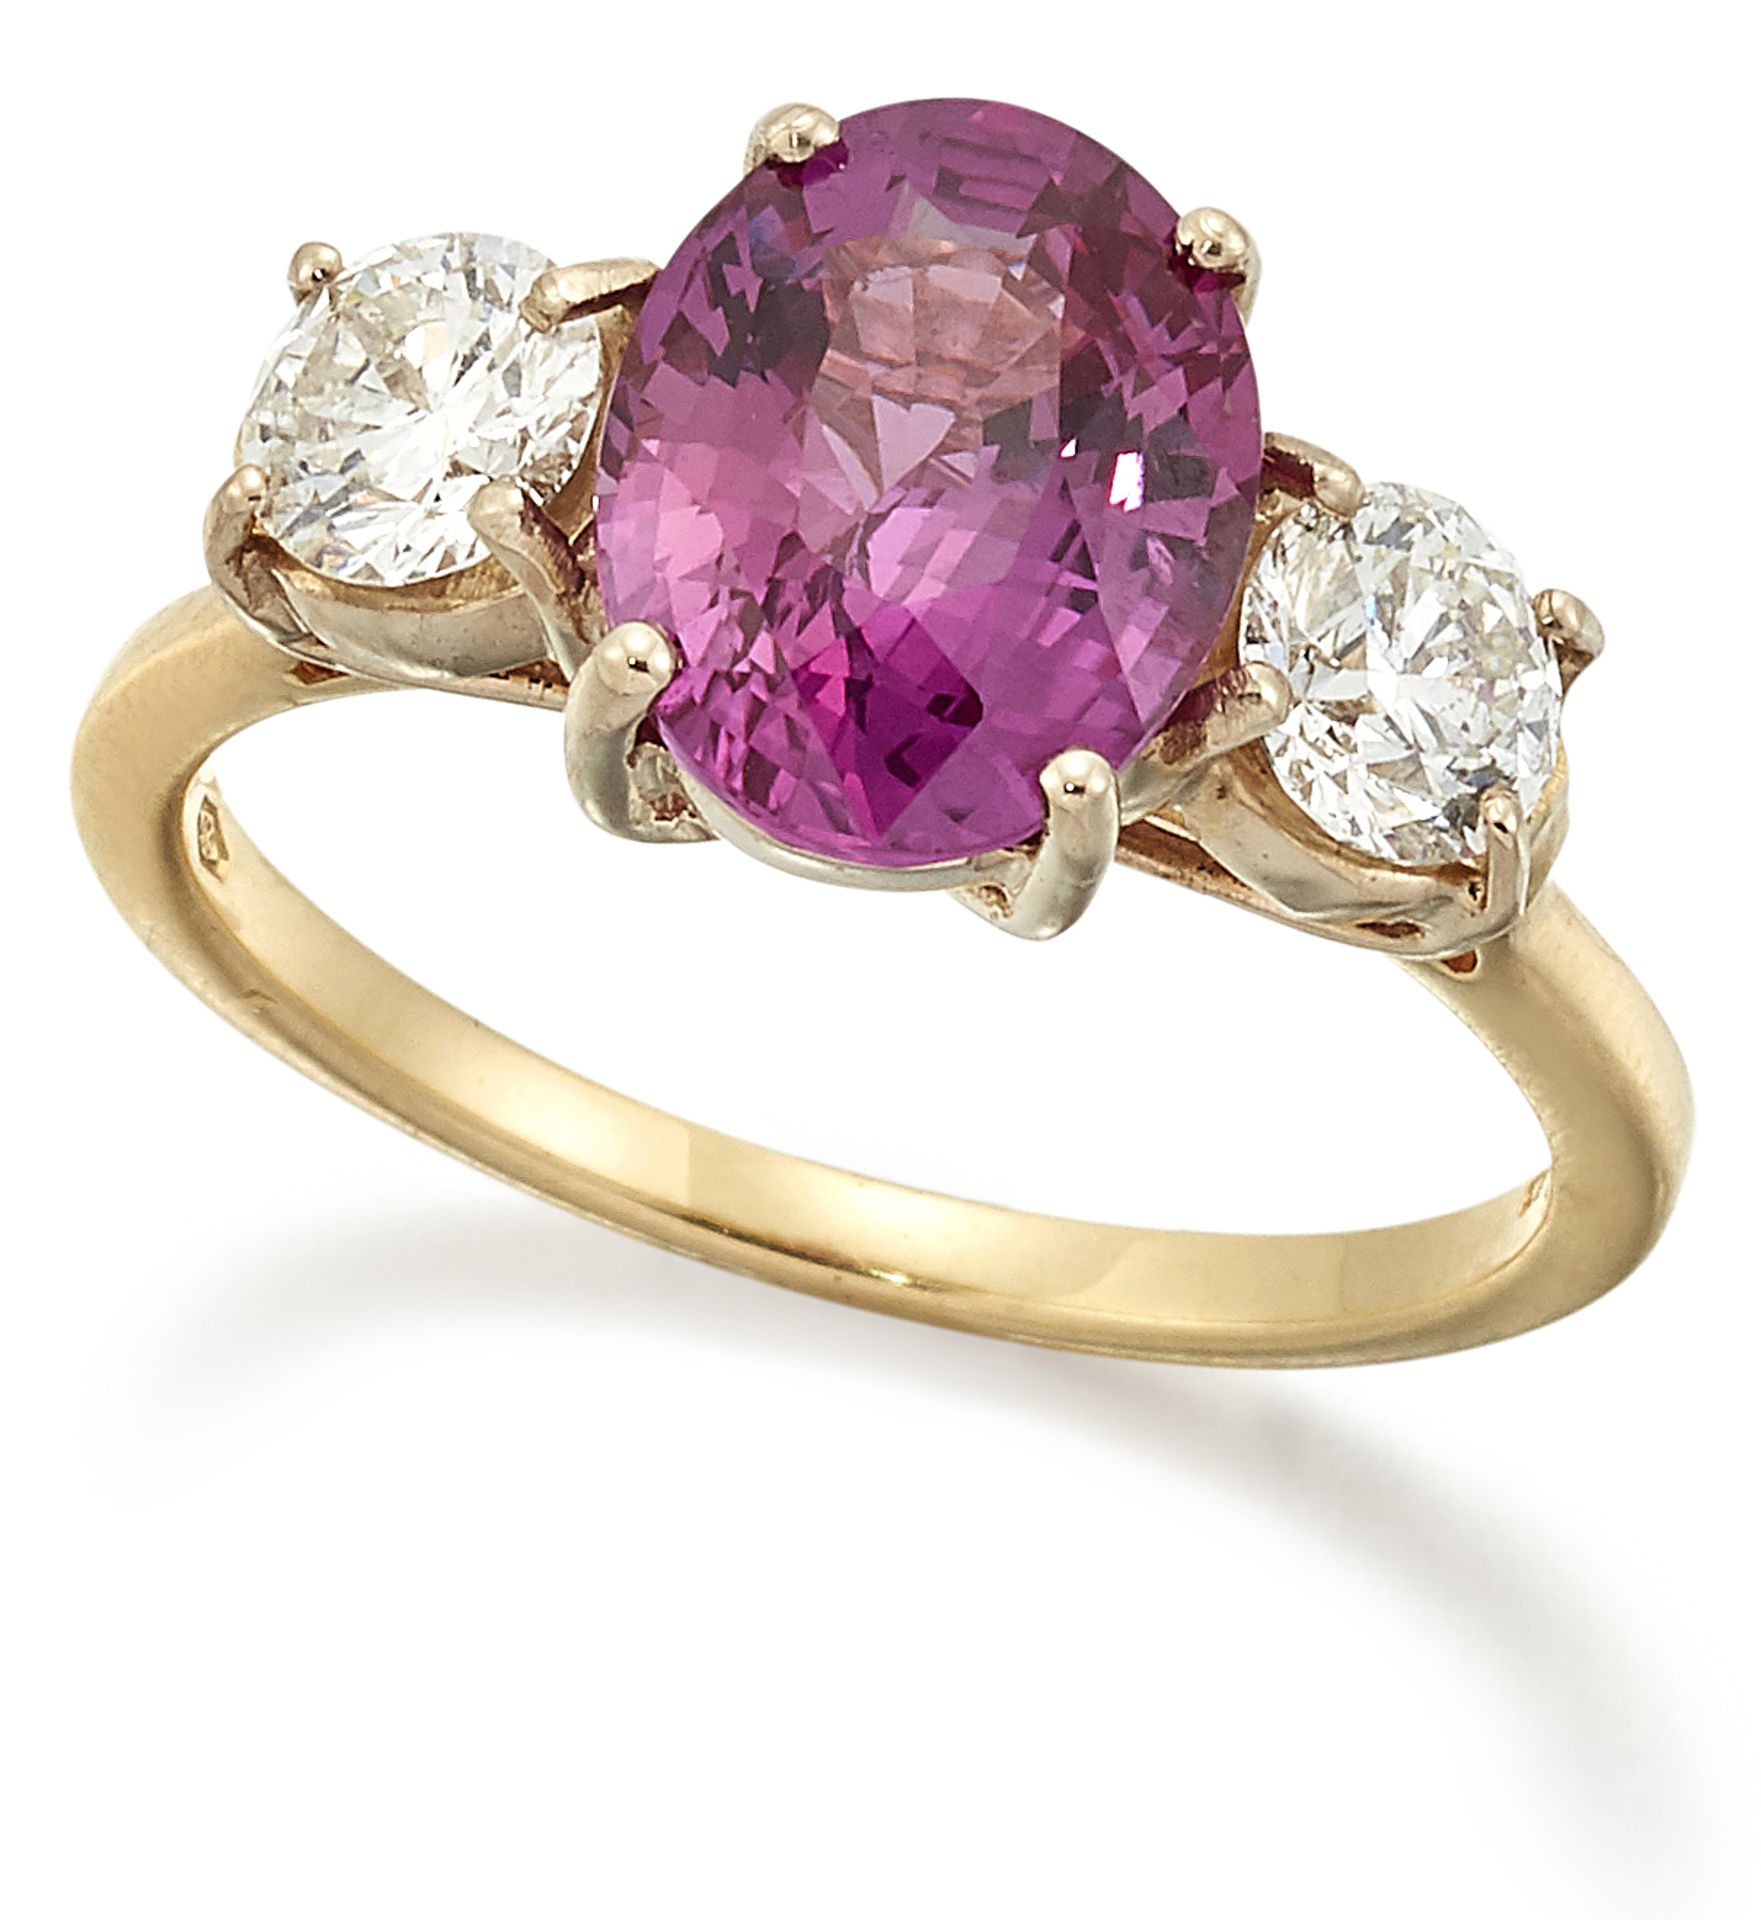 AN 18 CARAT GOLD PINK SAPPHIRE AND DIAMOND RING